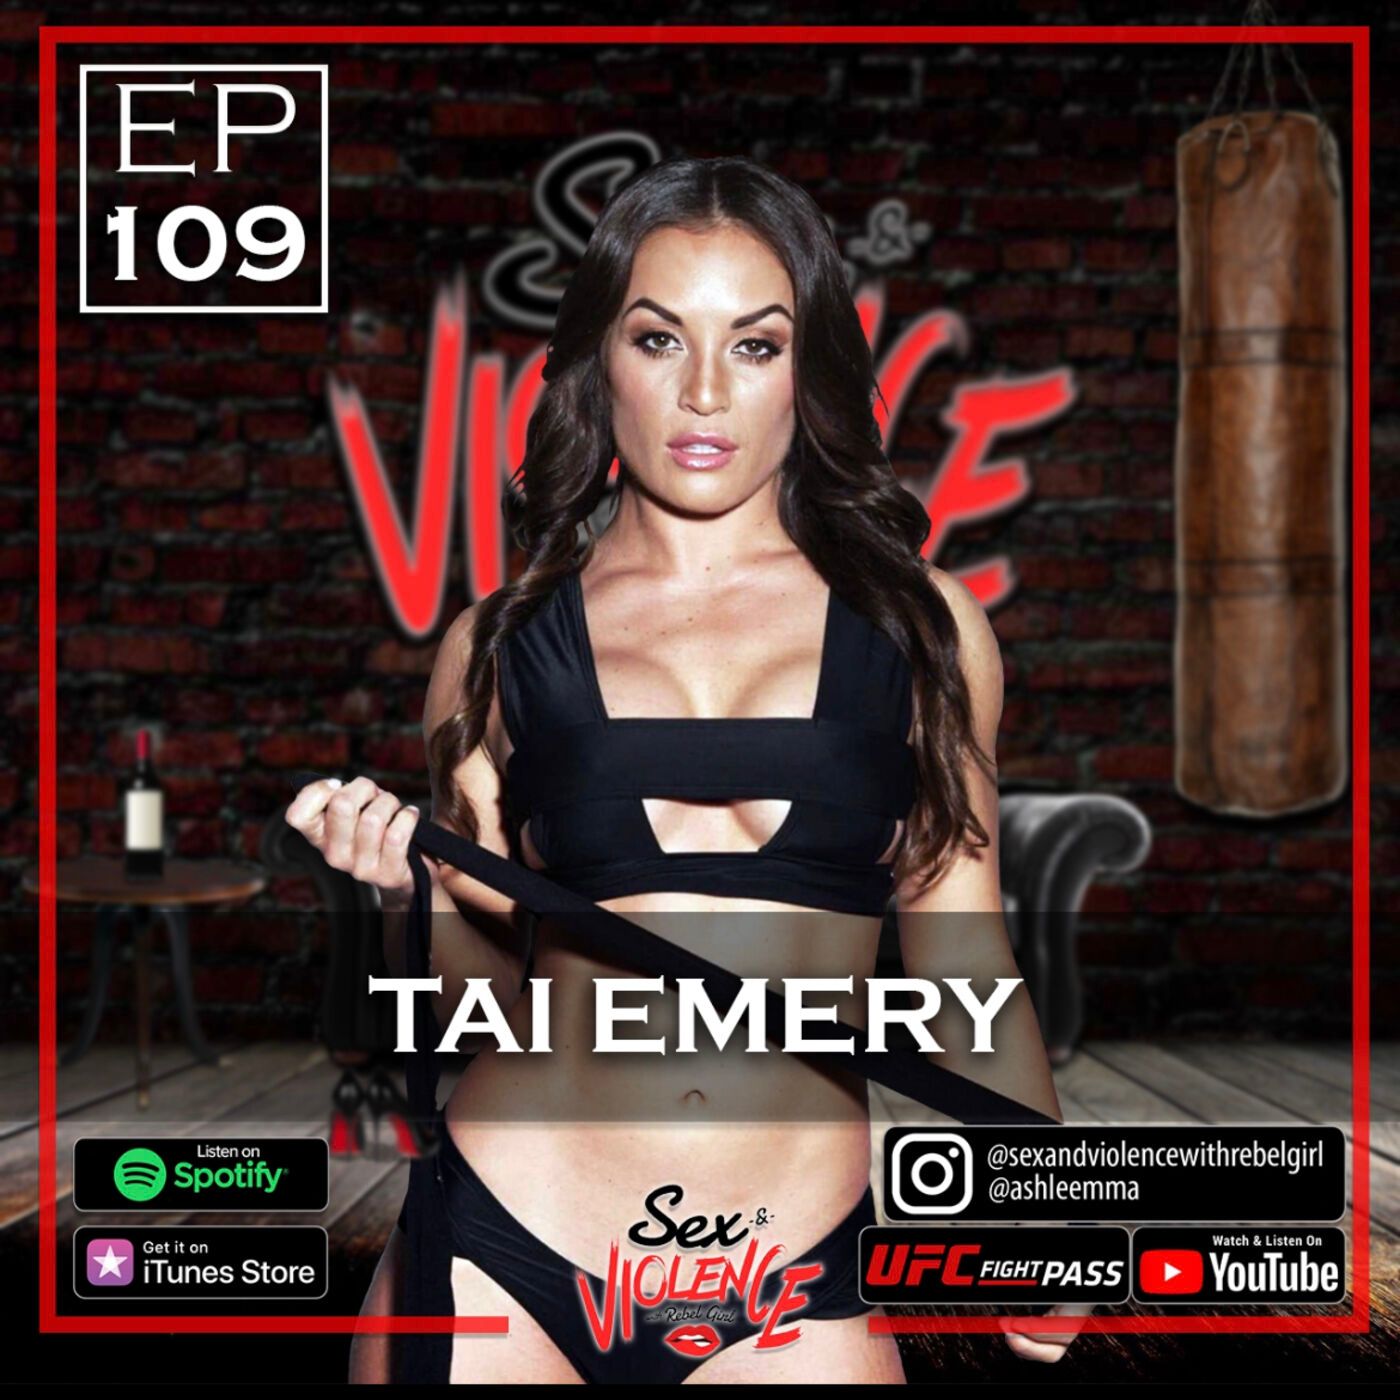 Ep.109 Tai Emery – Sex And Violence With Rebel Girl – Podcast photo pic